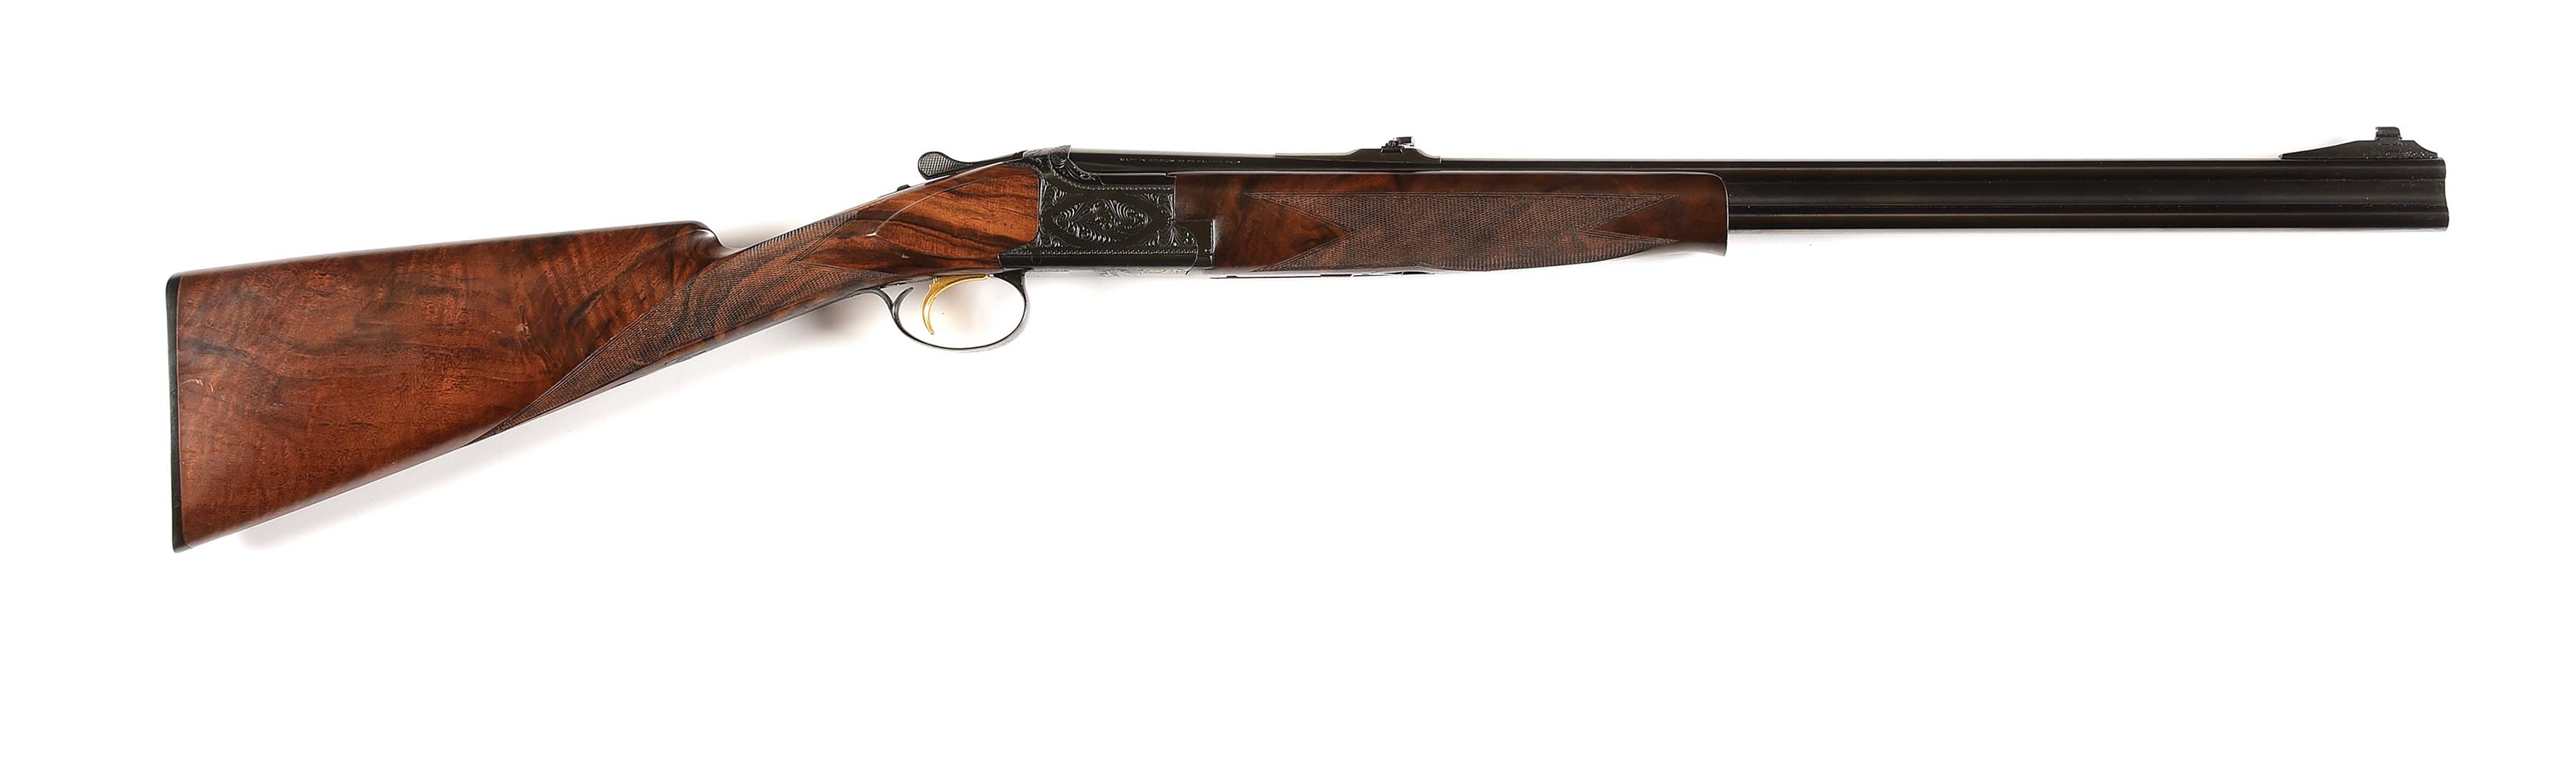 (M) BROWNING GRADE I CONTINENTAL .30-06 SUPERPOSED DOUBLE RIFLE.